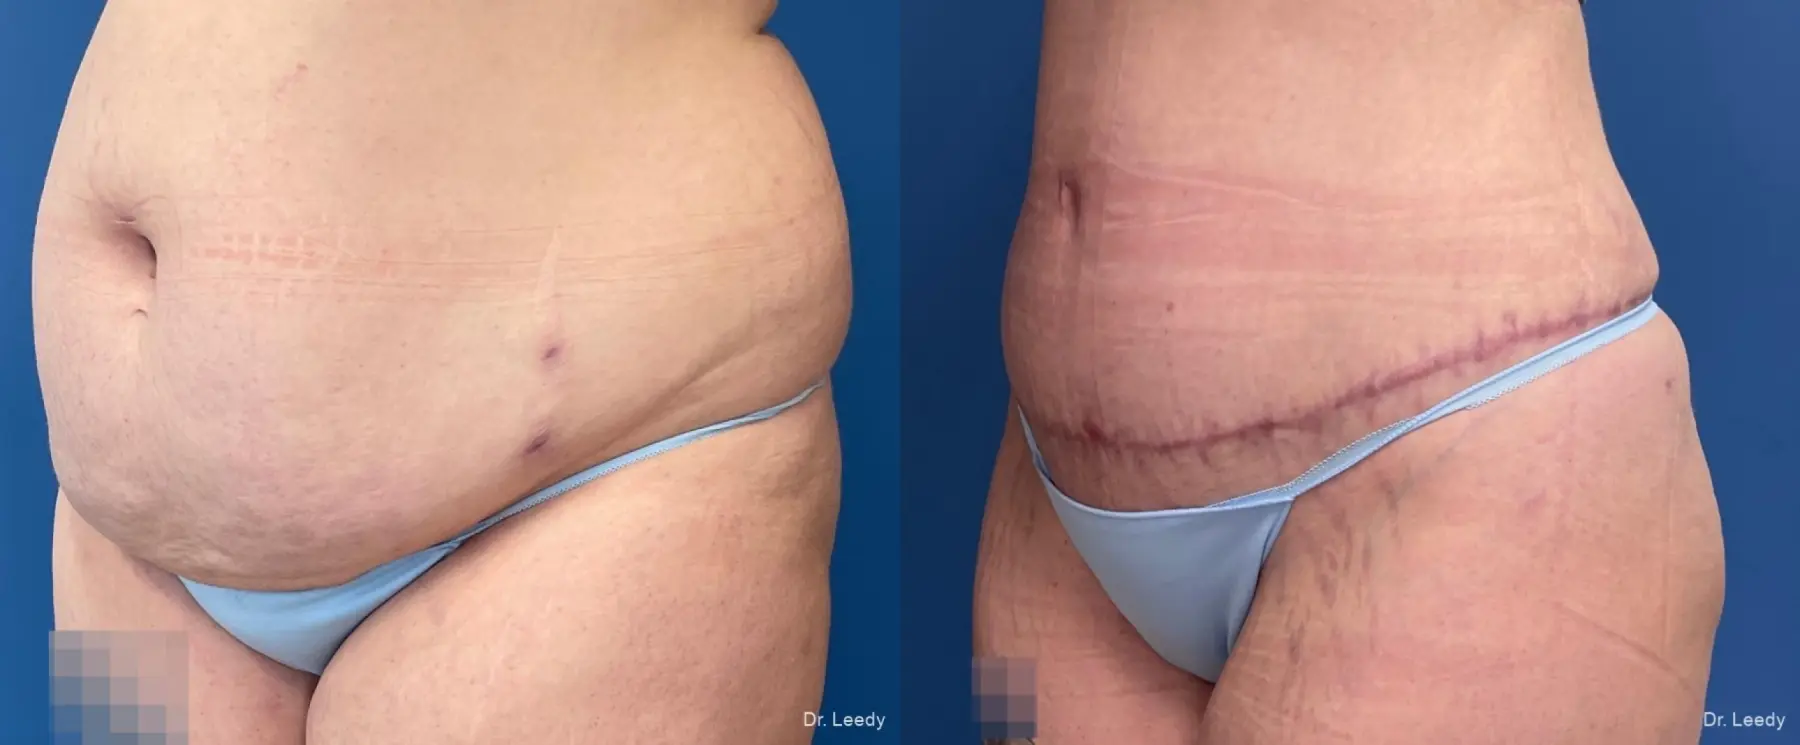 Abdominoplasty With BBL: Patient 8 - Before and After 2